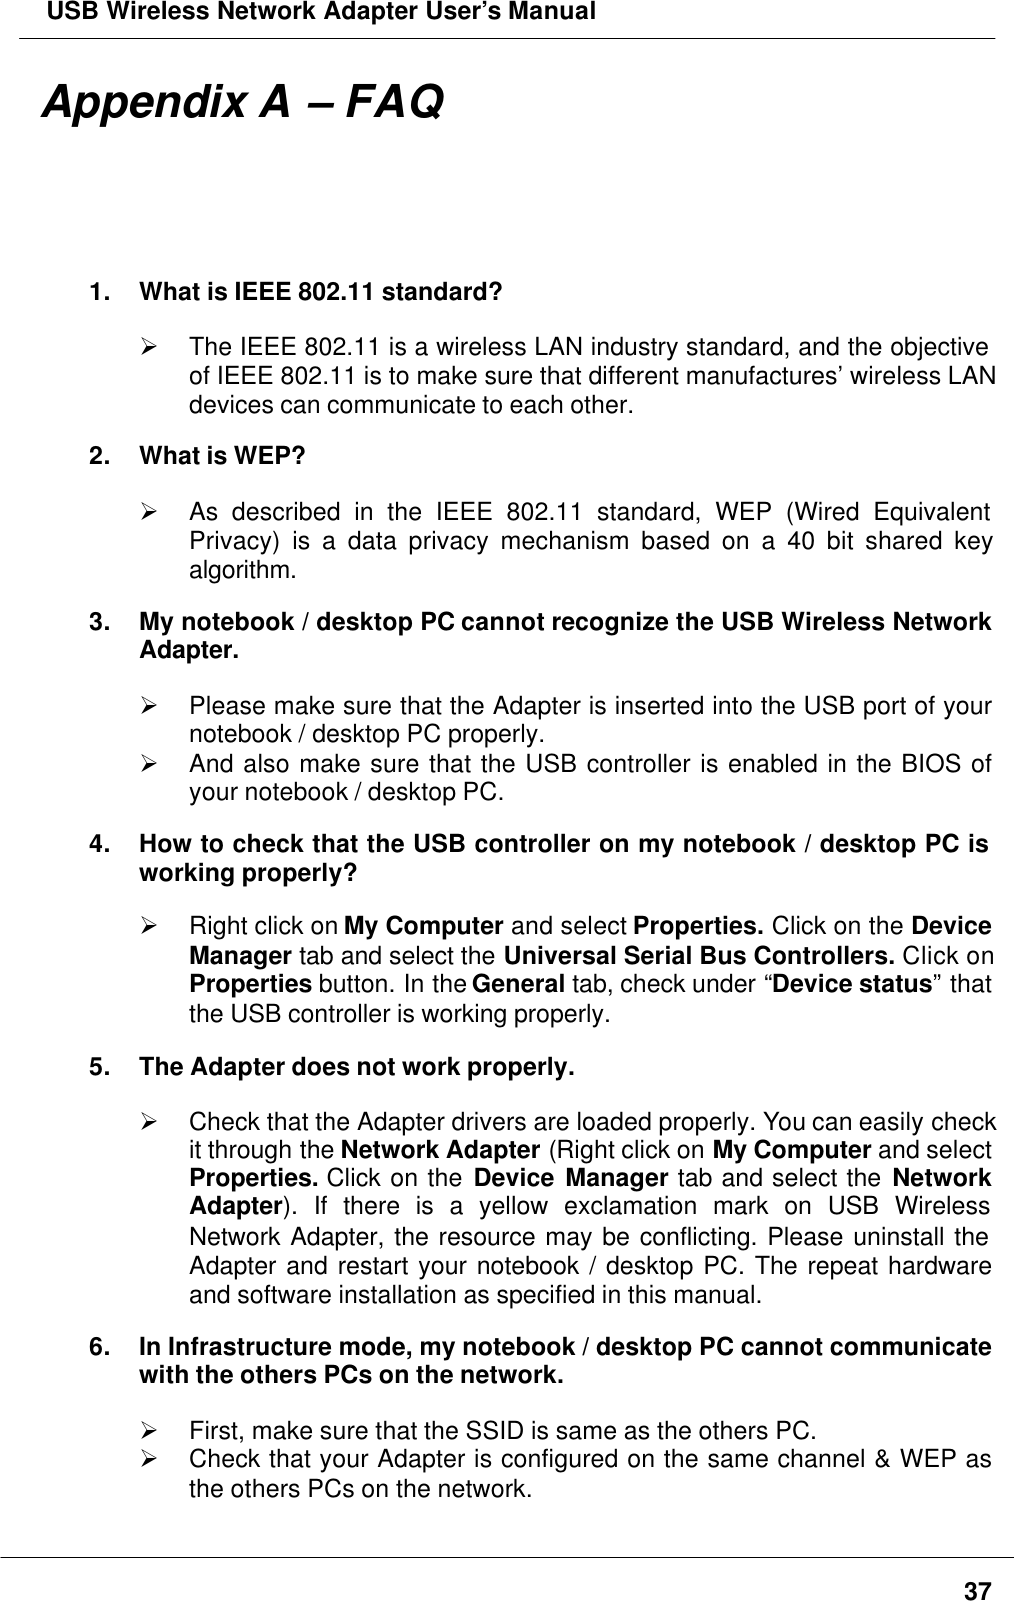  USB Wireless Network Adapter User’s Manual37Appendix A – FAQ1. What is IEEE 802.11 standard?Ø The IEEE 802.11 is a wireless LAN industry standard, and the objectiveof IEEE 802.11 is to make sure that different manufactures’ wireless LANdevices can communicate to each other.2. What is WEP?Ø As described in the IEEE 802.11 standard, WEP (Wired EquivalentPrivacy) is a data privacy mechanism based on a 40 bit shared keyalgorithm.3. My notebook / desktop PC cannot recognize the USB Wireless NetworkAdapter.Ø Please make sure that the Adapter is inserted into the USB port of yournotebook / desktop PC properly.Ø And also make sure that the USB controller is enabled in the BIOS ofyour notebook / desktop PC.4. How to check that the USB controller on my notebook / desktop PC isworking properly?Ø Right click on My Computer and select Properties. Click on the DeviceManager tab and select the Universal Serial Bus Controllers. Click onProperties button. In the General tab, check under “Device status” thatthe USB controller is working properly.5. The Adapter does not work properly.Ø Check that the Adapter drivers are loaded properly. You can easily checkit through the Network Adapter (Right click on My Computer and selectProperties. Click on the Device Manager tab and select the NetworkAdapter). If there is a yellow exclamation mark on USB WirelessNetwork Adapter, the resource may be conflicting. Please uninstall theAdapter and restart your notebook / desktop PC. The repeat hardwareand software installation as specified in this manual.6. In Infrastructure mode, my notebook / desktop PC cannot communicatewith the others PCs on the network.Ø First, make sure that the SSID is same as the others PC.Ø Check that your Adapter is configured on the same channel &amp; WEP asthe others PCs on the network.